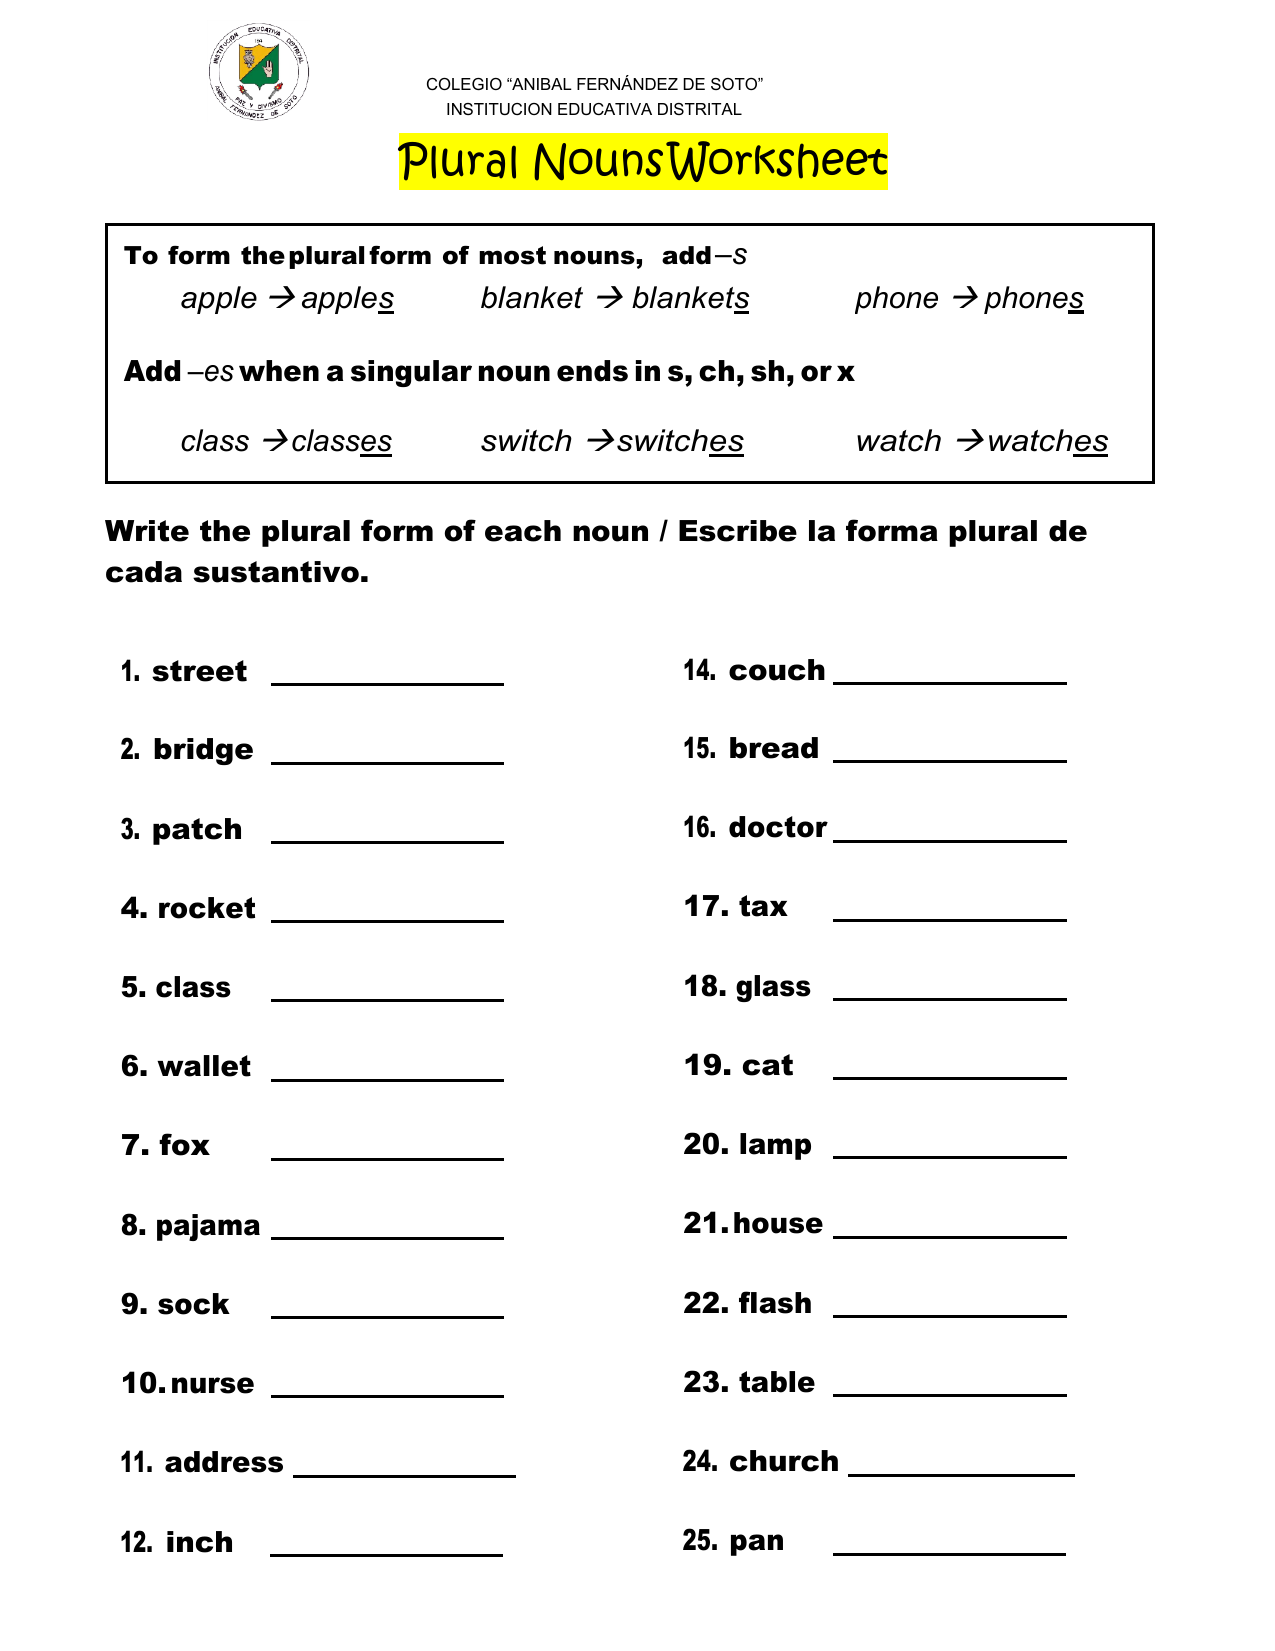 free-printable-worksheets-on-rules-for-forming-plurals-of-nouns